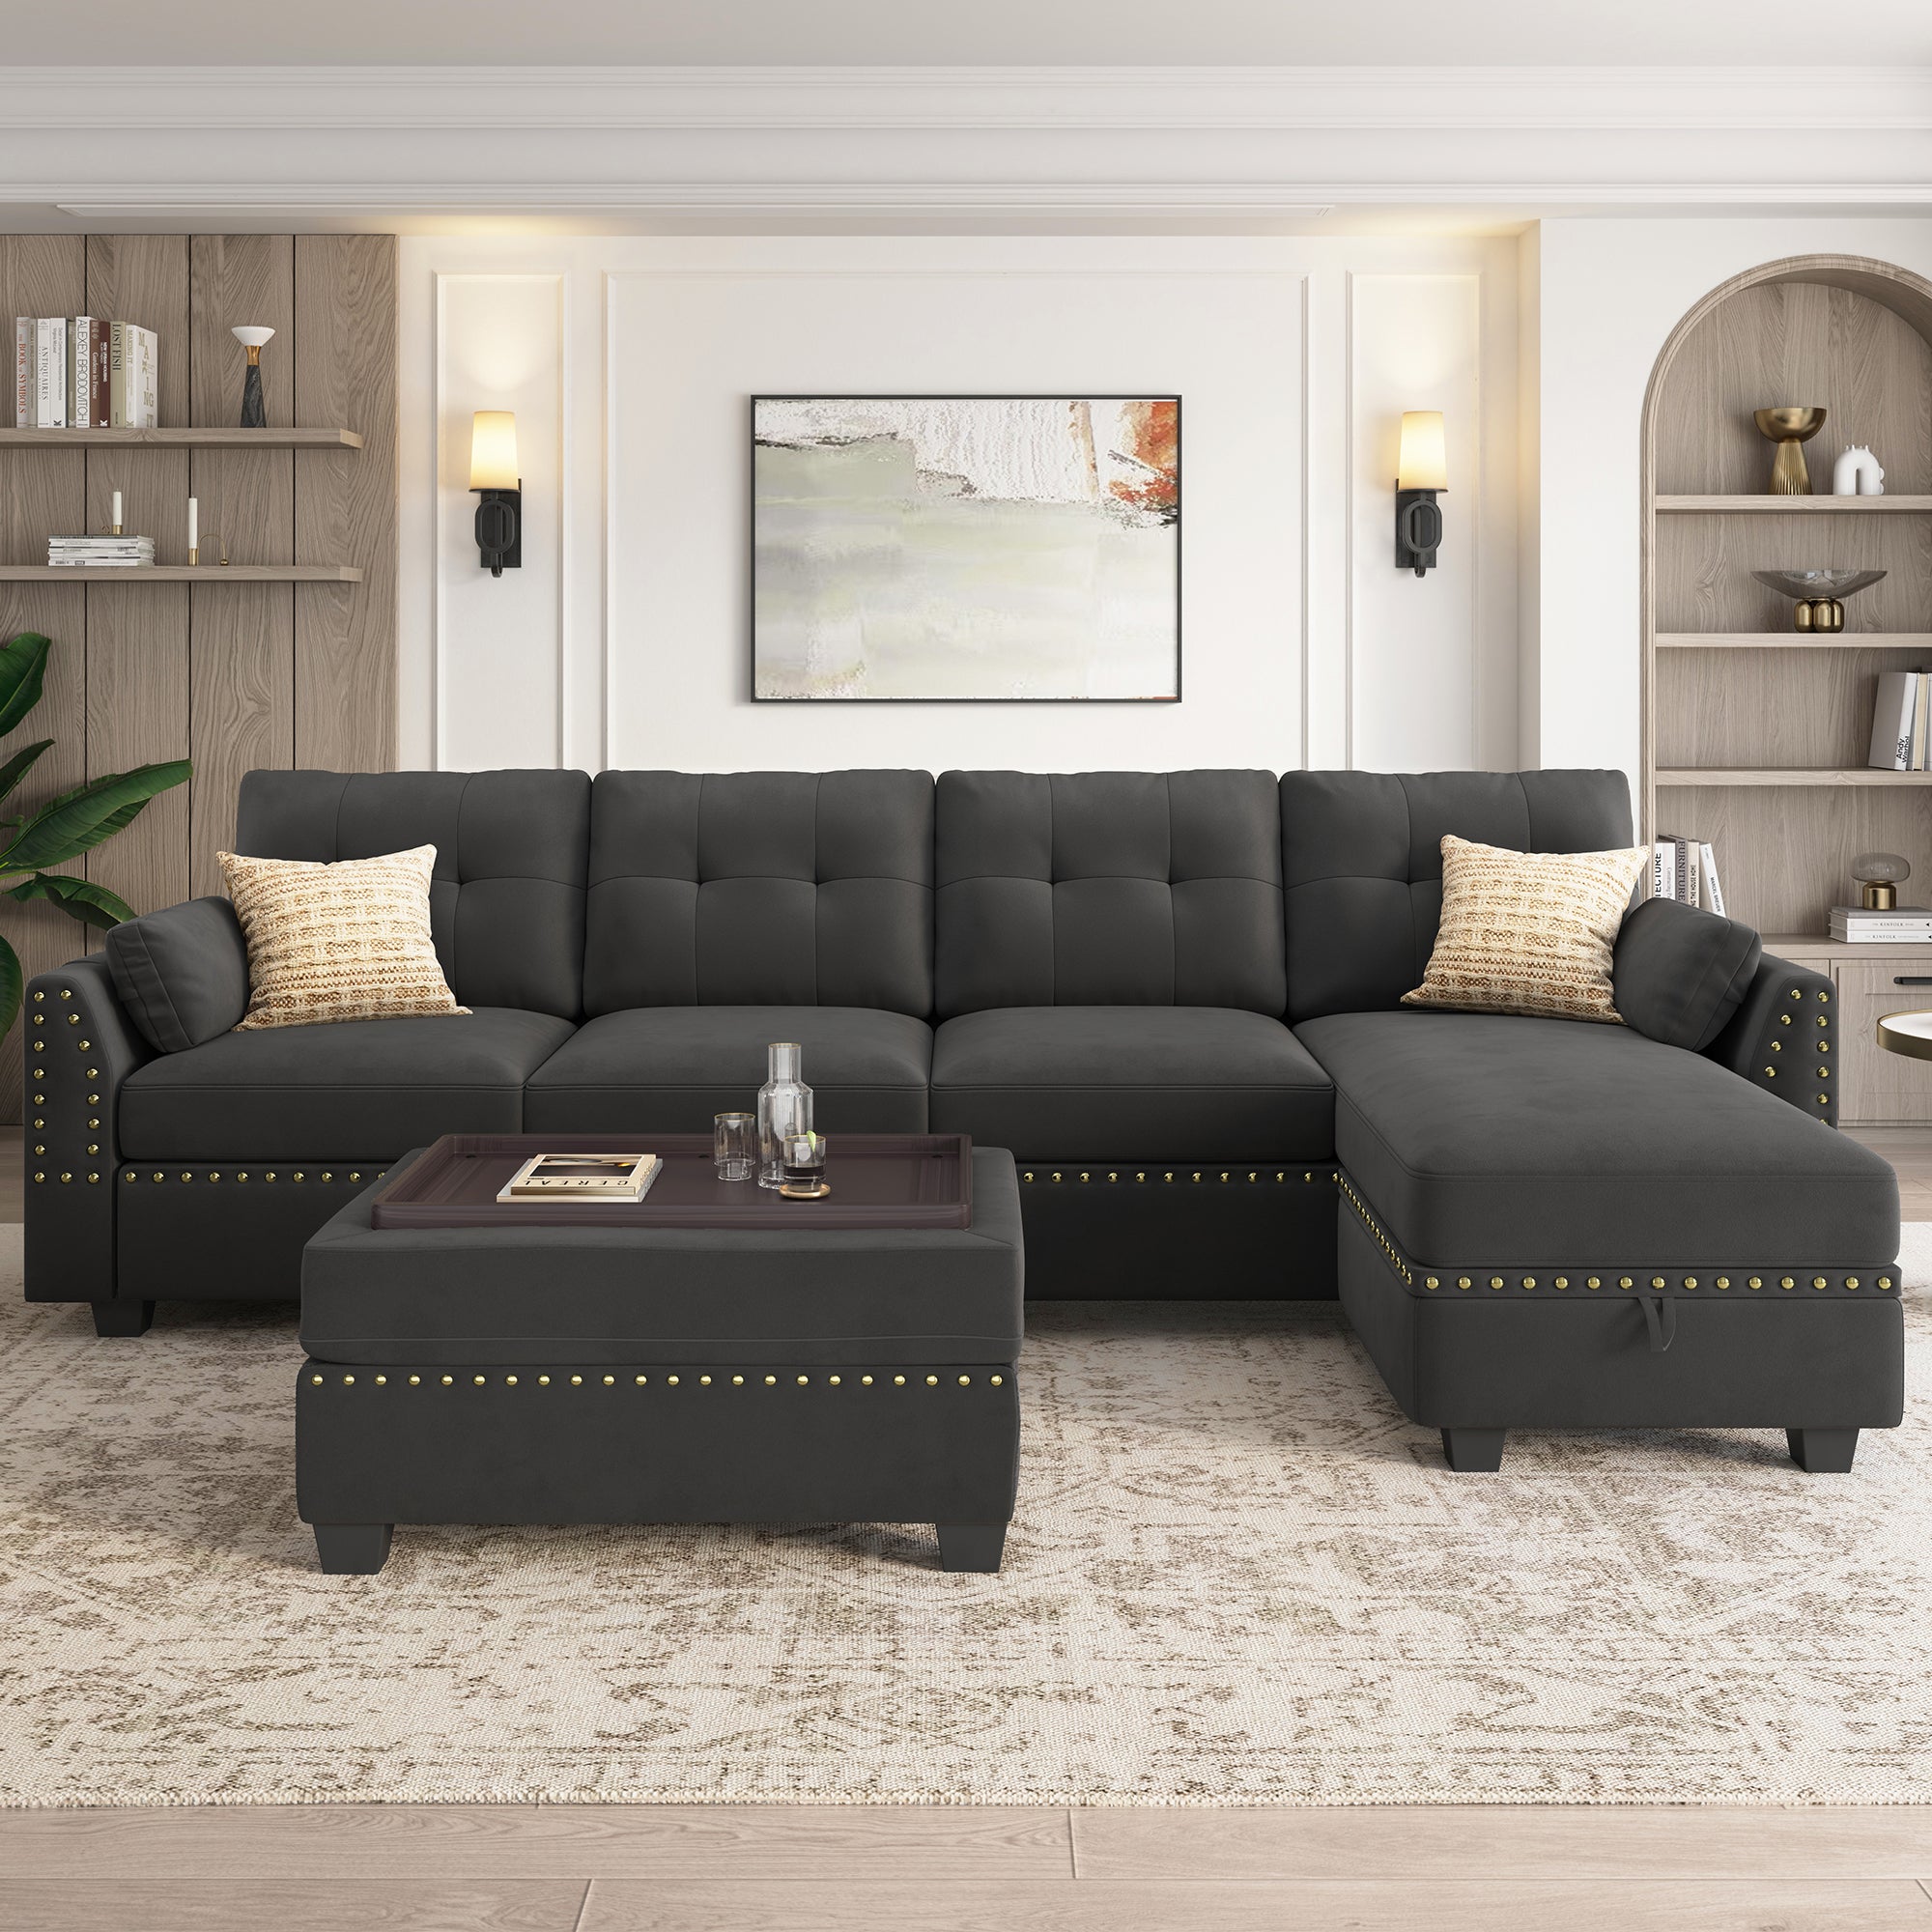 HONBAY 5-Piece Velvet Convertible Sectional With Tray Ottoman